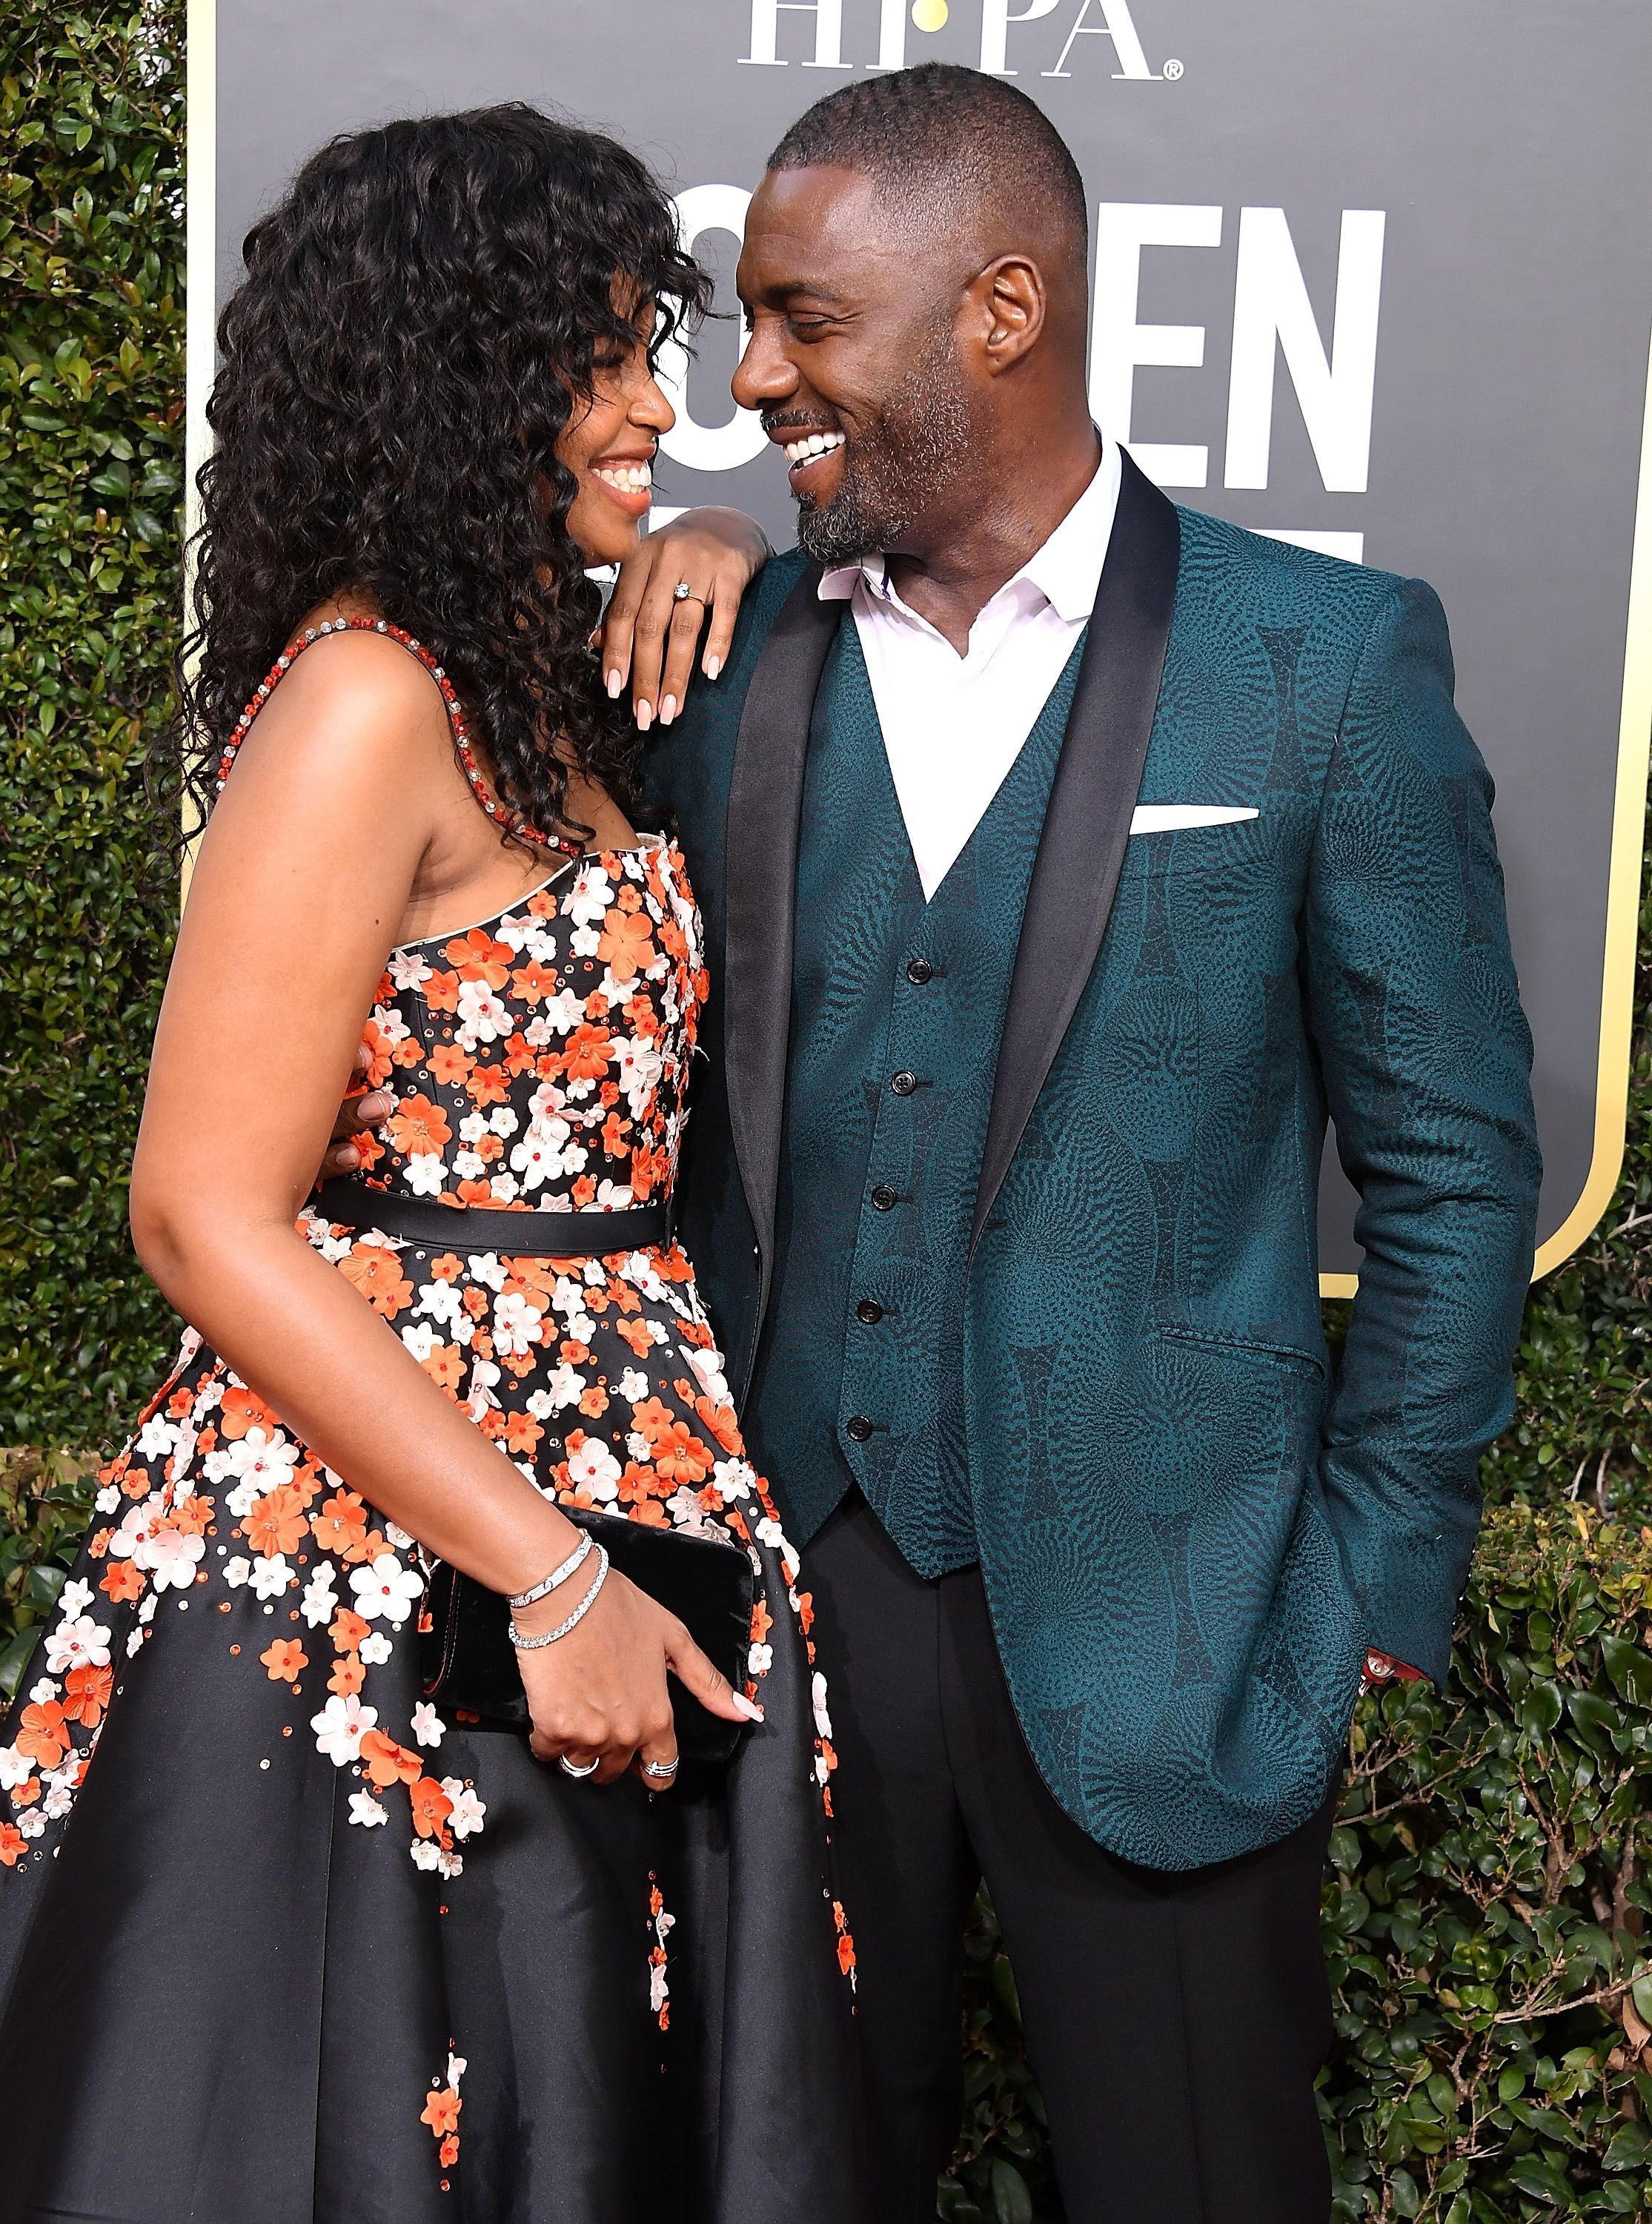 Issa Wrap, Ladies Idris Elba and Sabrina Dhowre Are Officially Married! image picture